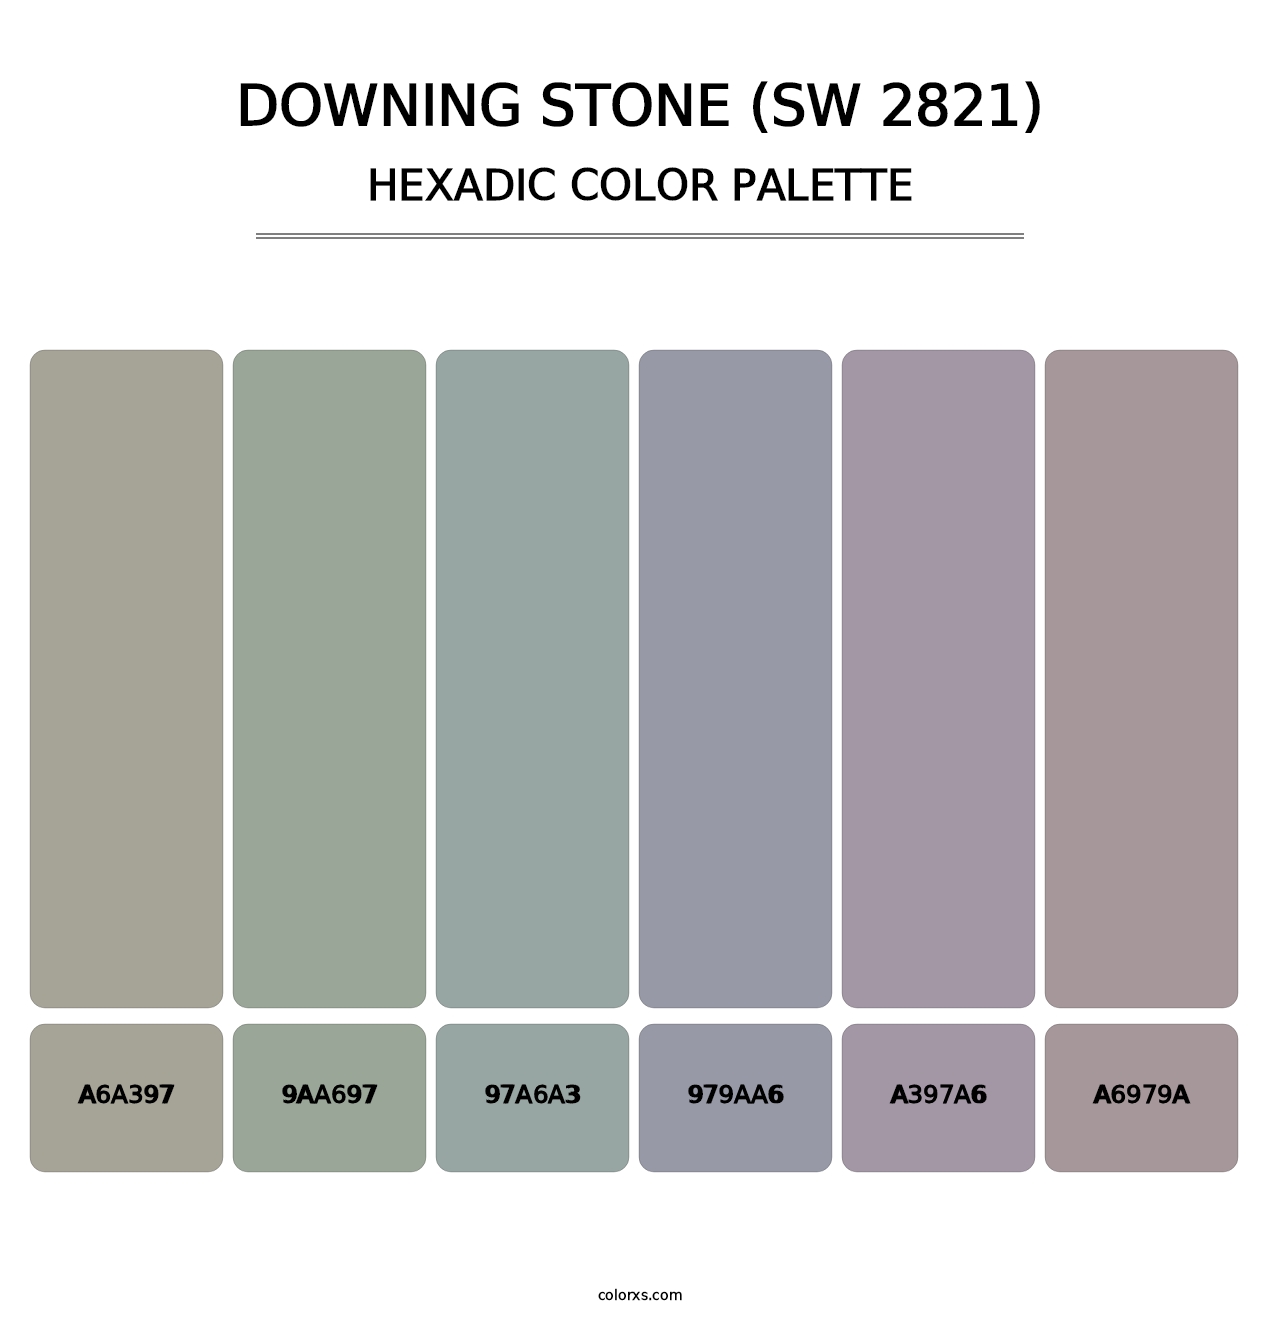 Downing Stone (SW 2821) - Hexadic Color Palette